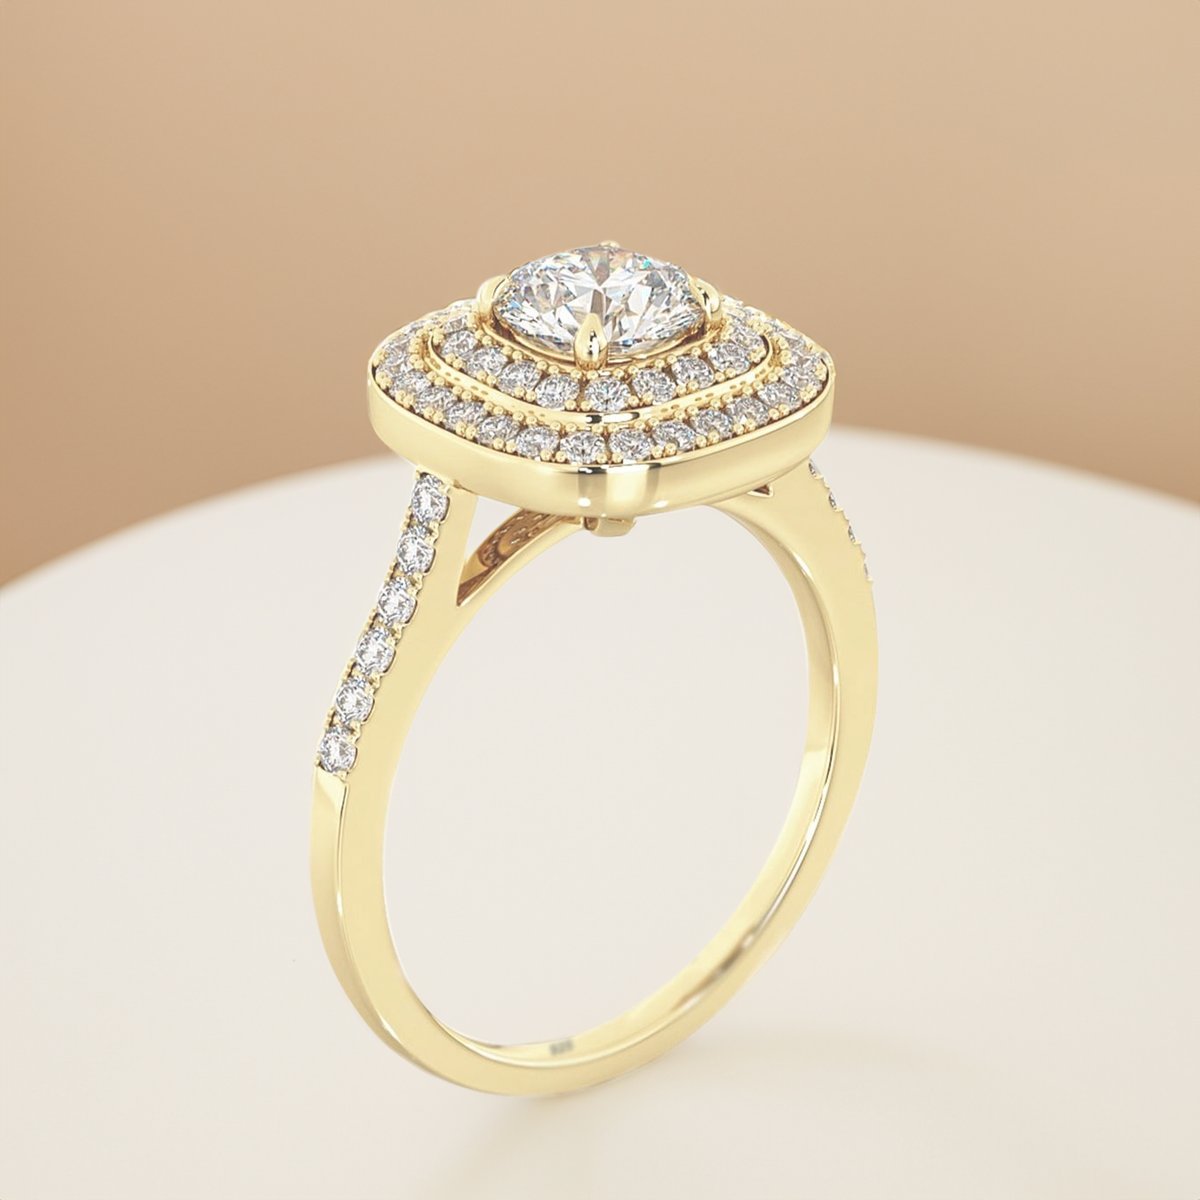 Round-Cut Gold Tone Double Halo Ring In 925 Sterling Silver - Code 233

Find it here: bit.ly/3ojqrmN

#weddingrings #silverring #zirconia
#lovejewelry #silverjewelry #sterlingsilver #cubiczirconia #besttohave #besttohavejewelry #silver925 #engagement #wedding #proposal